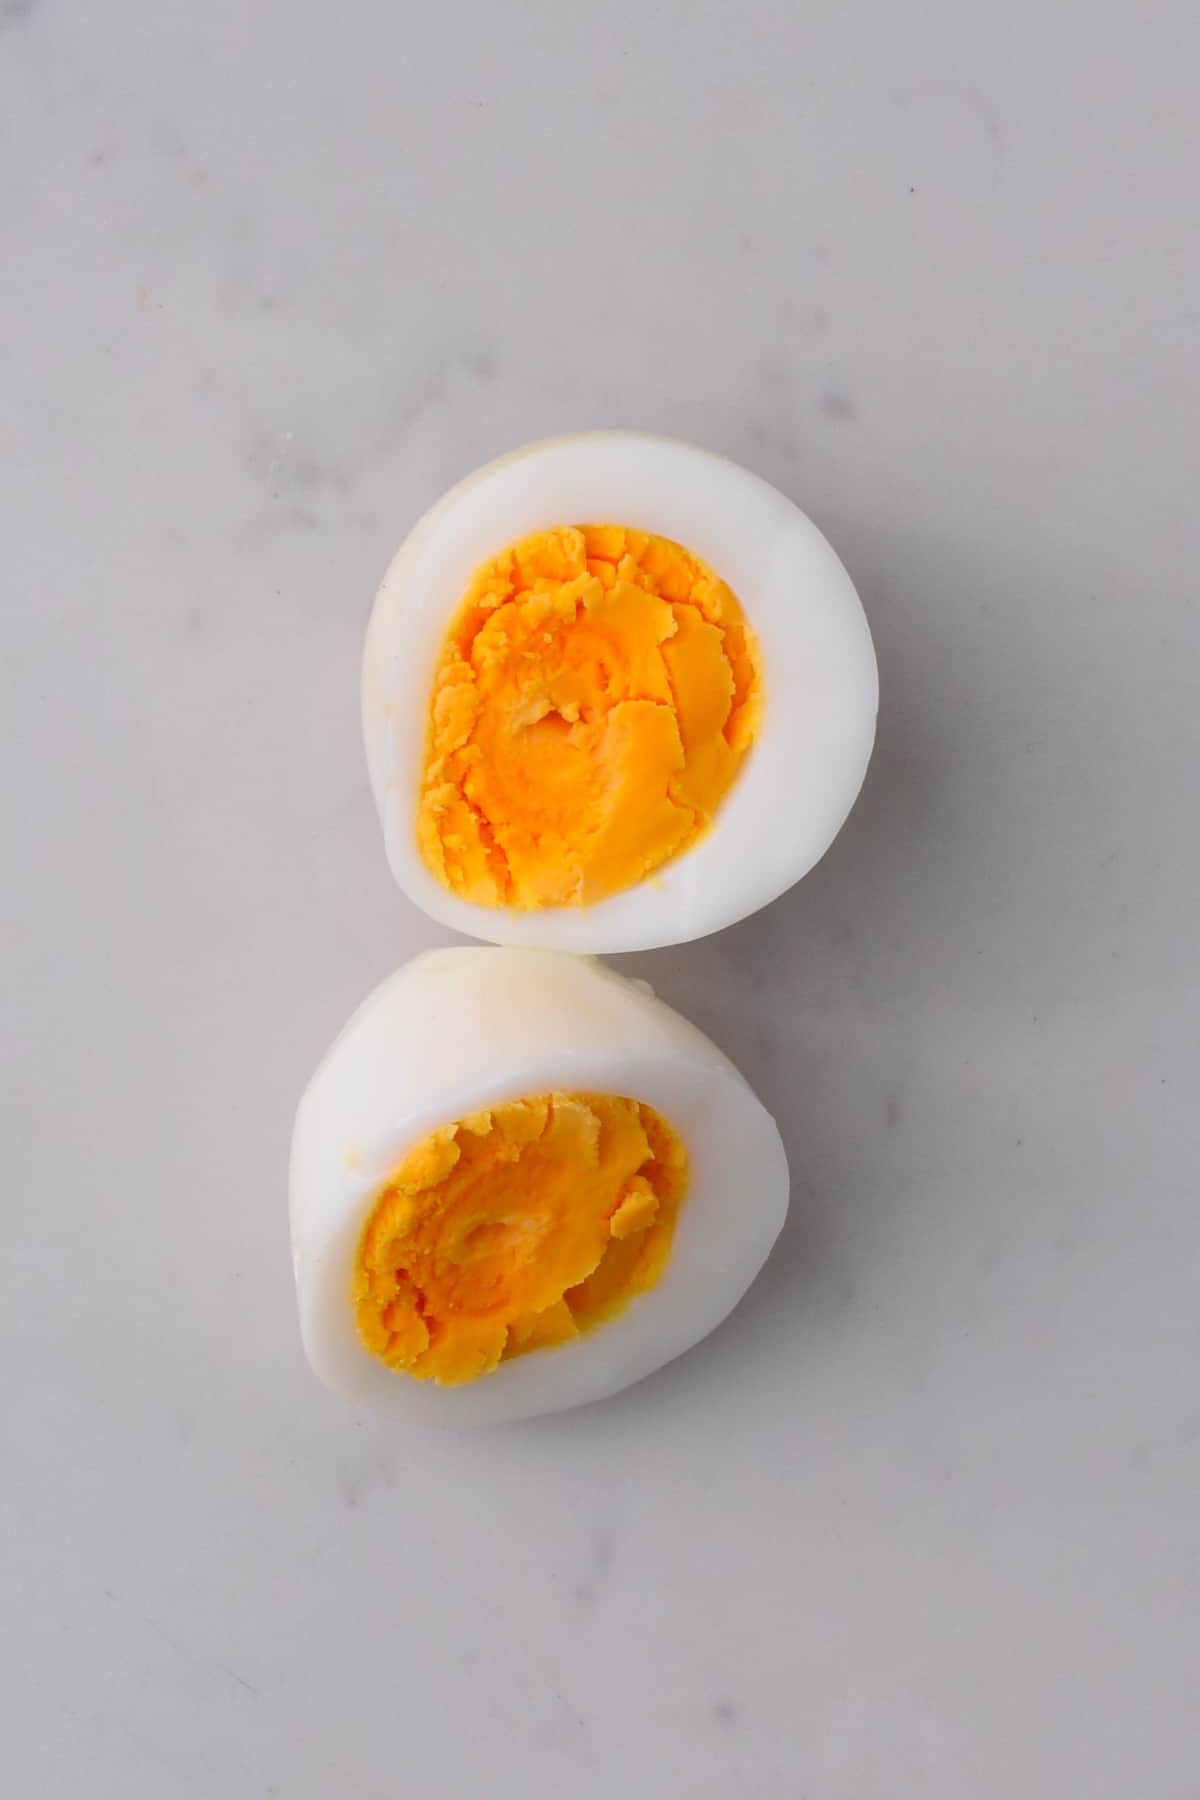 Cooked egg cut in half on a flat surface